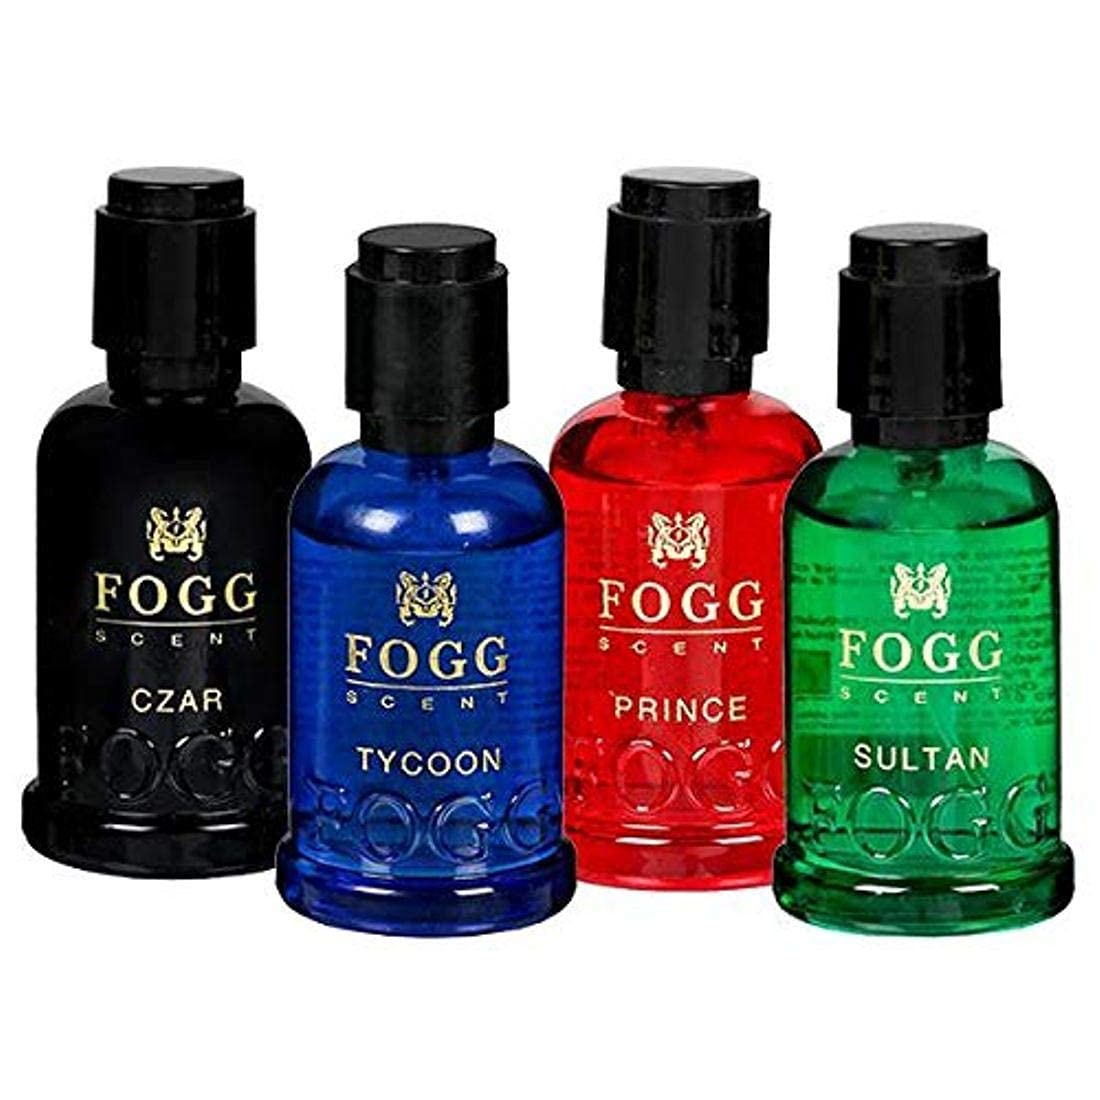  Fogg Mini Scent for Men and Women - Pack of  four